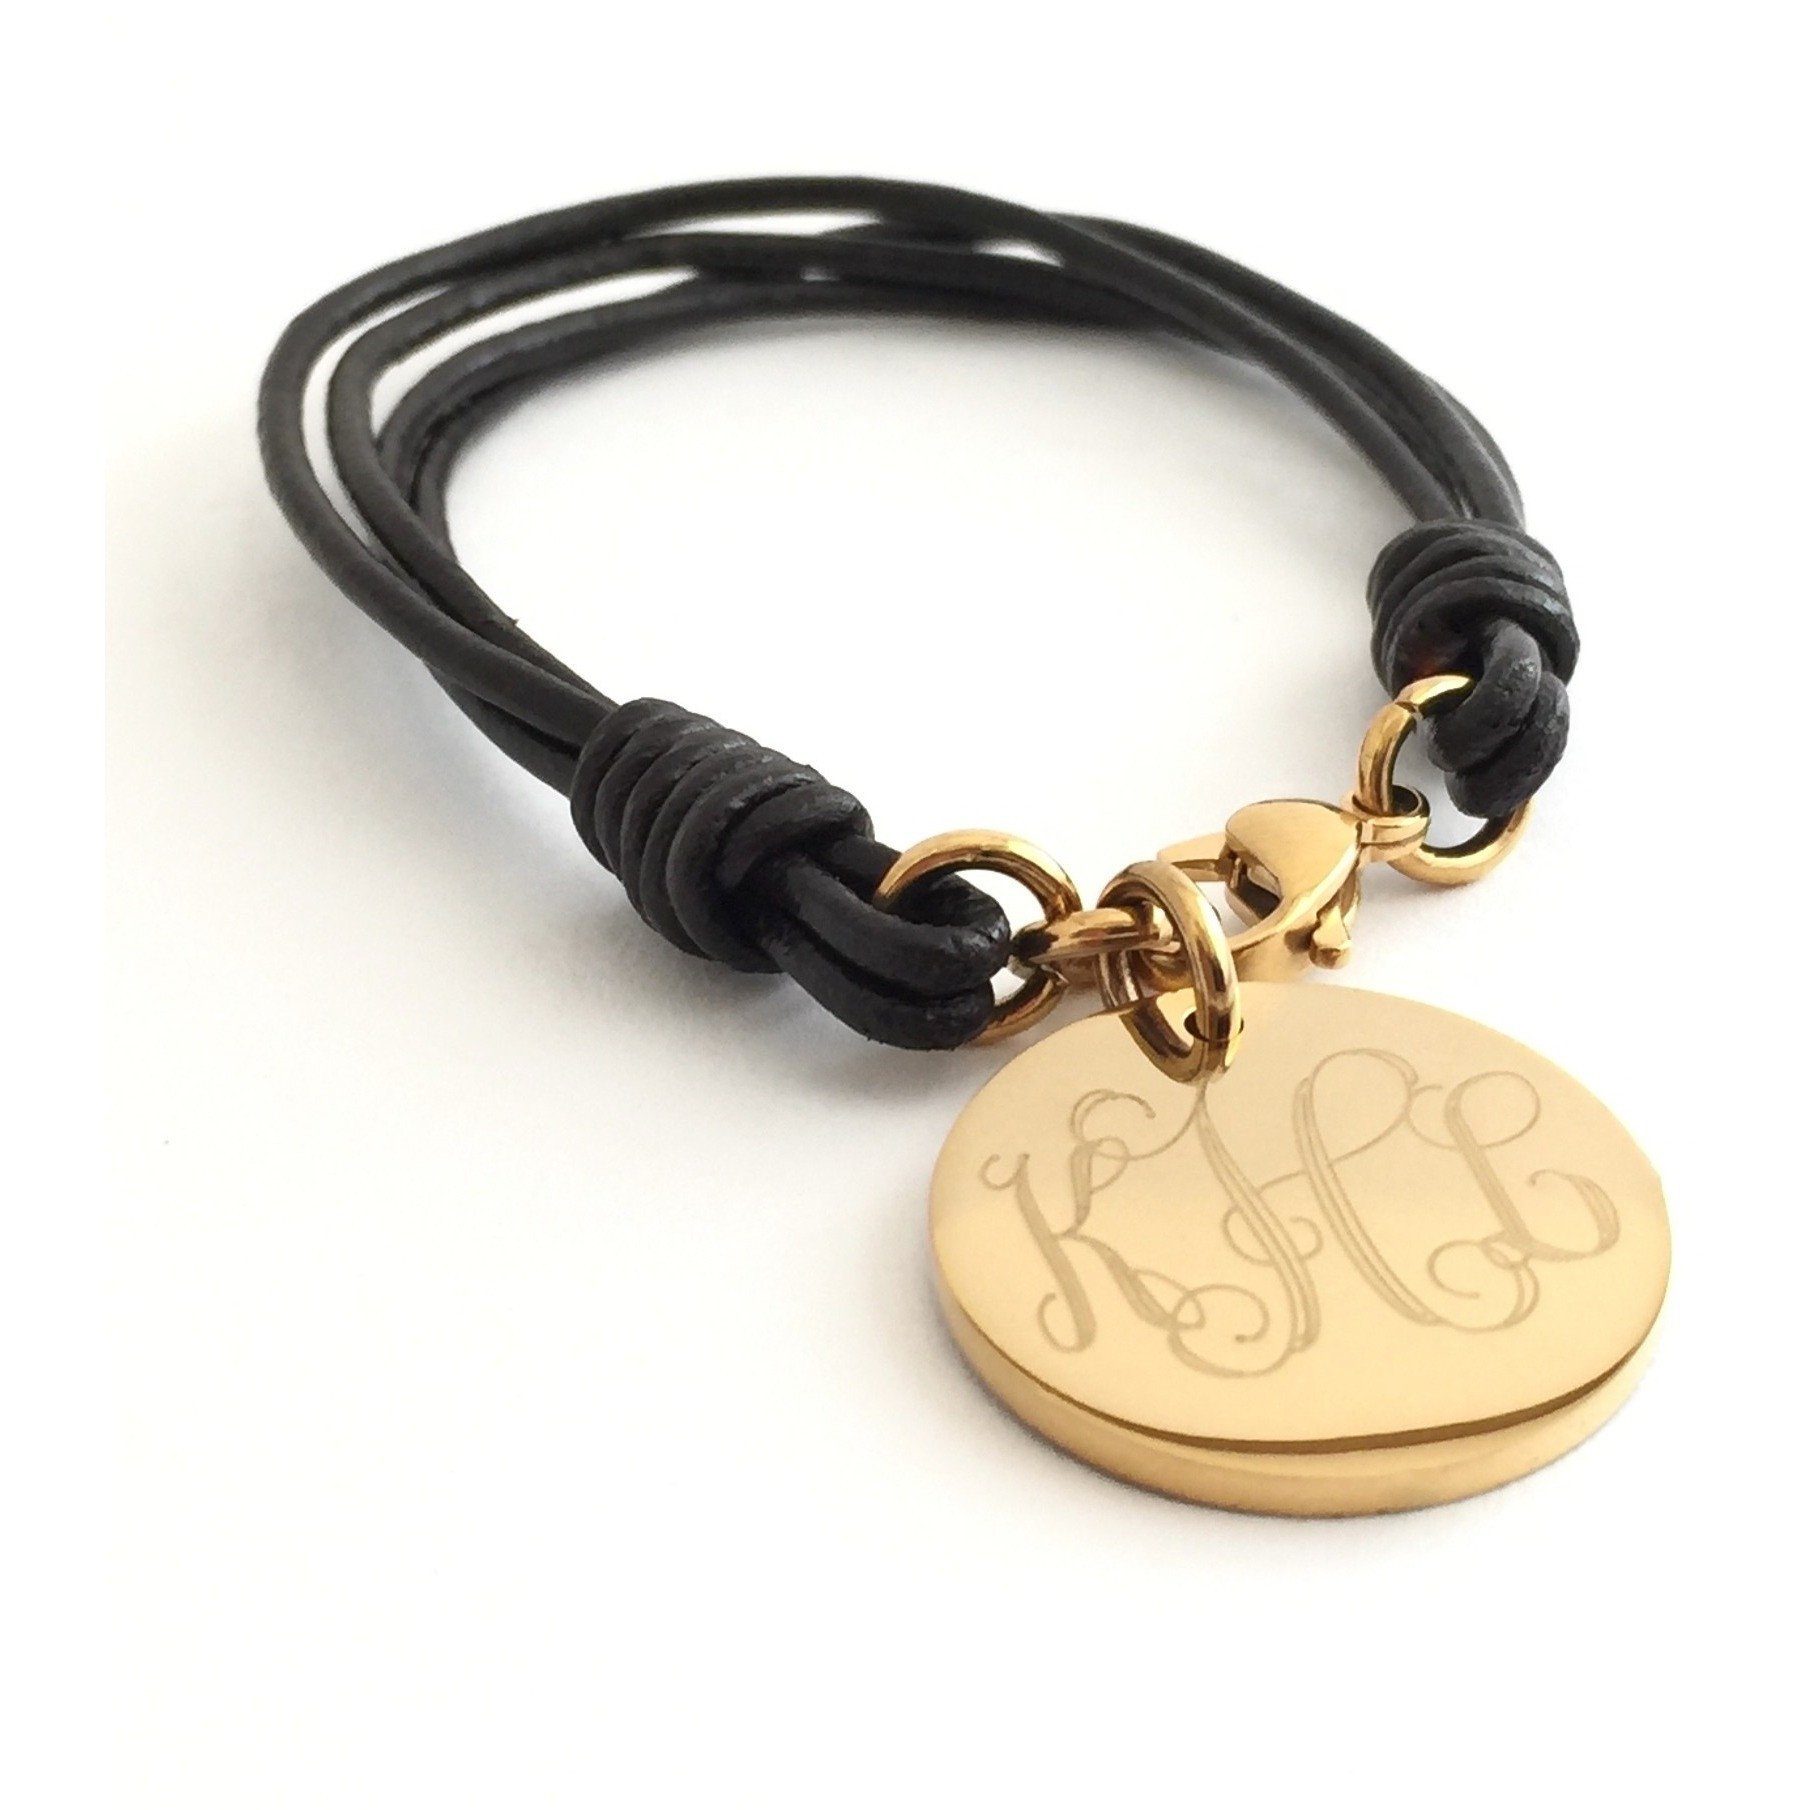 Leather Monogram Bracelet With Gold Charm - The Personal Exchange